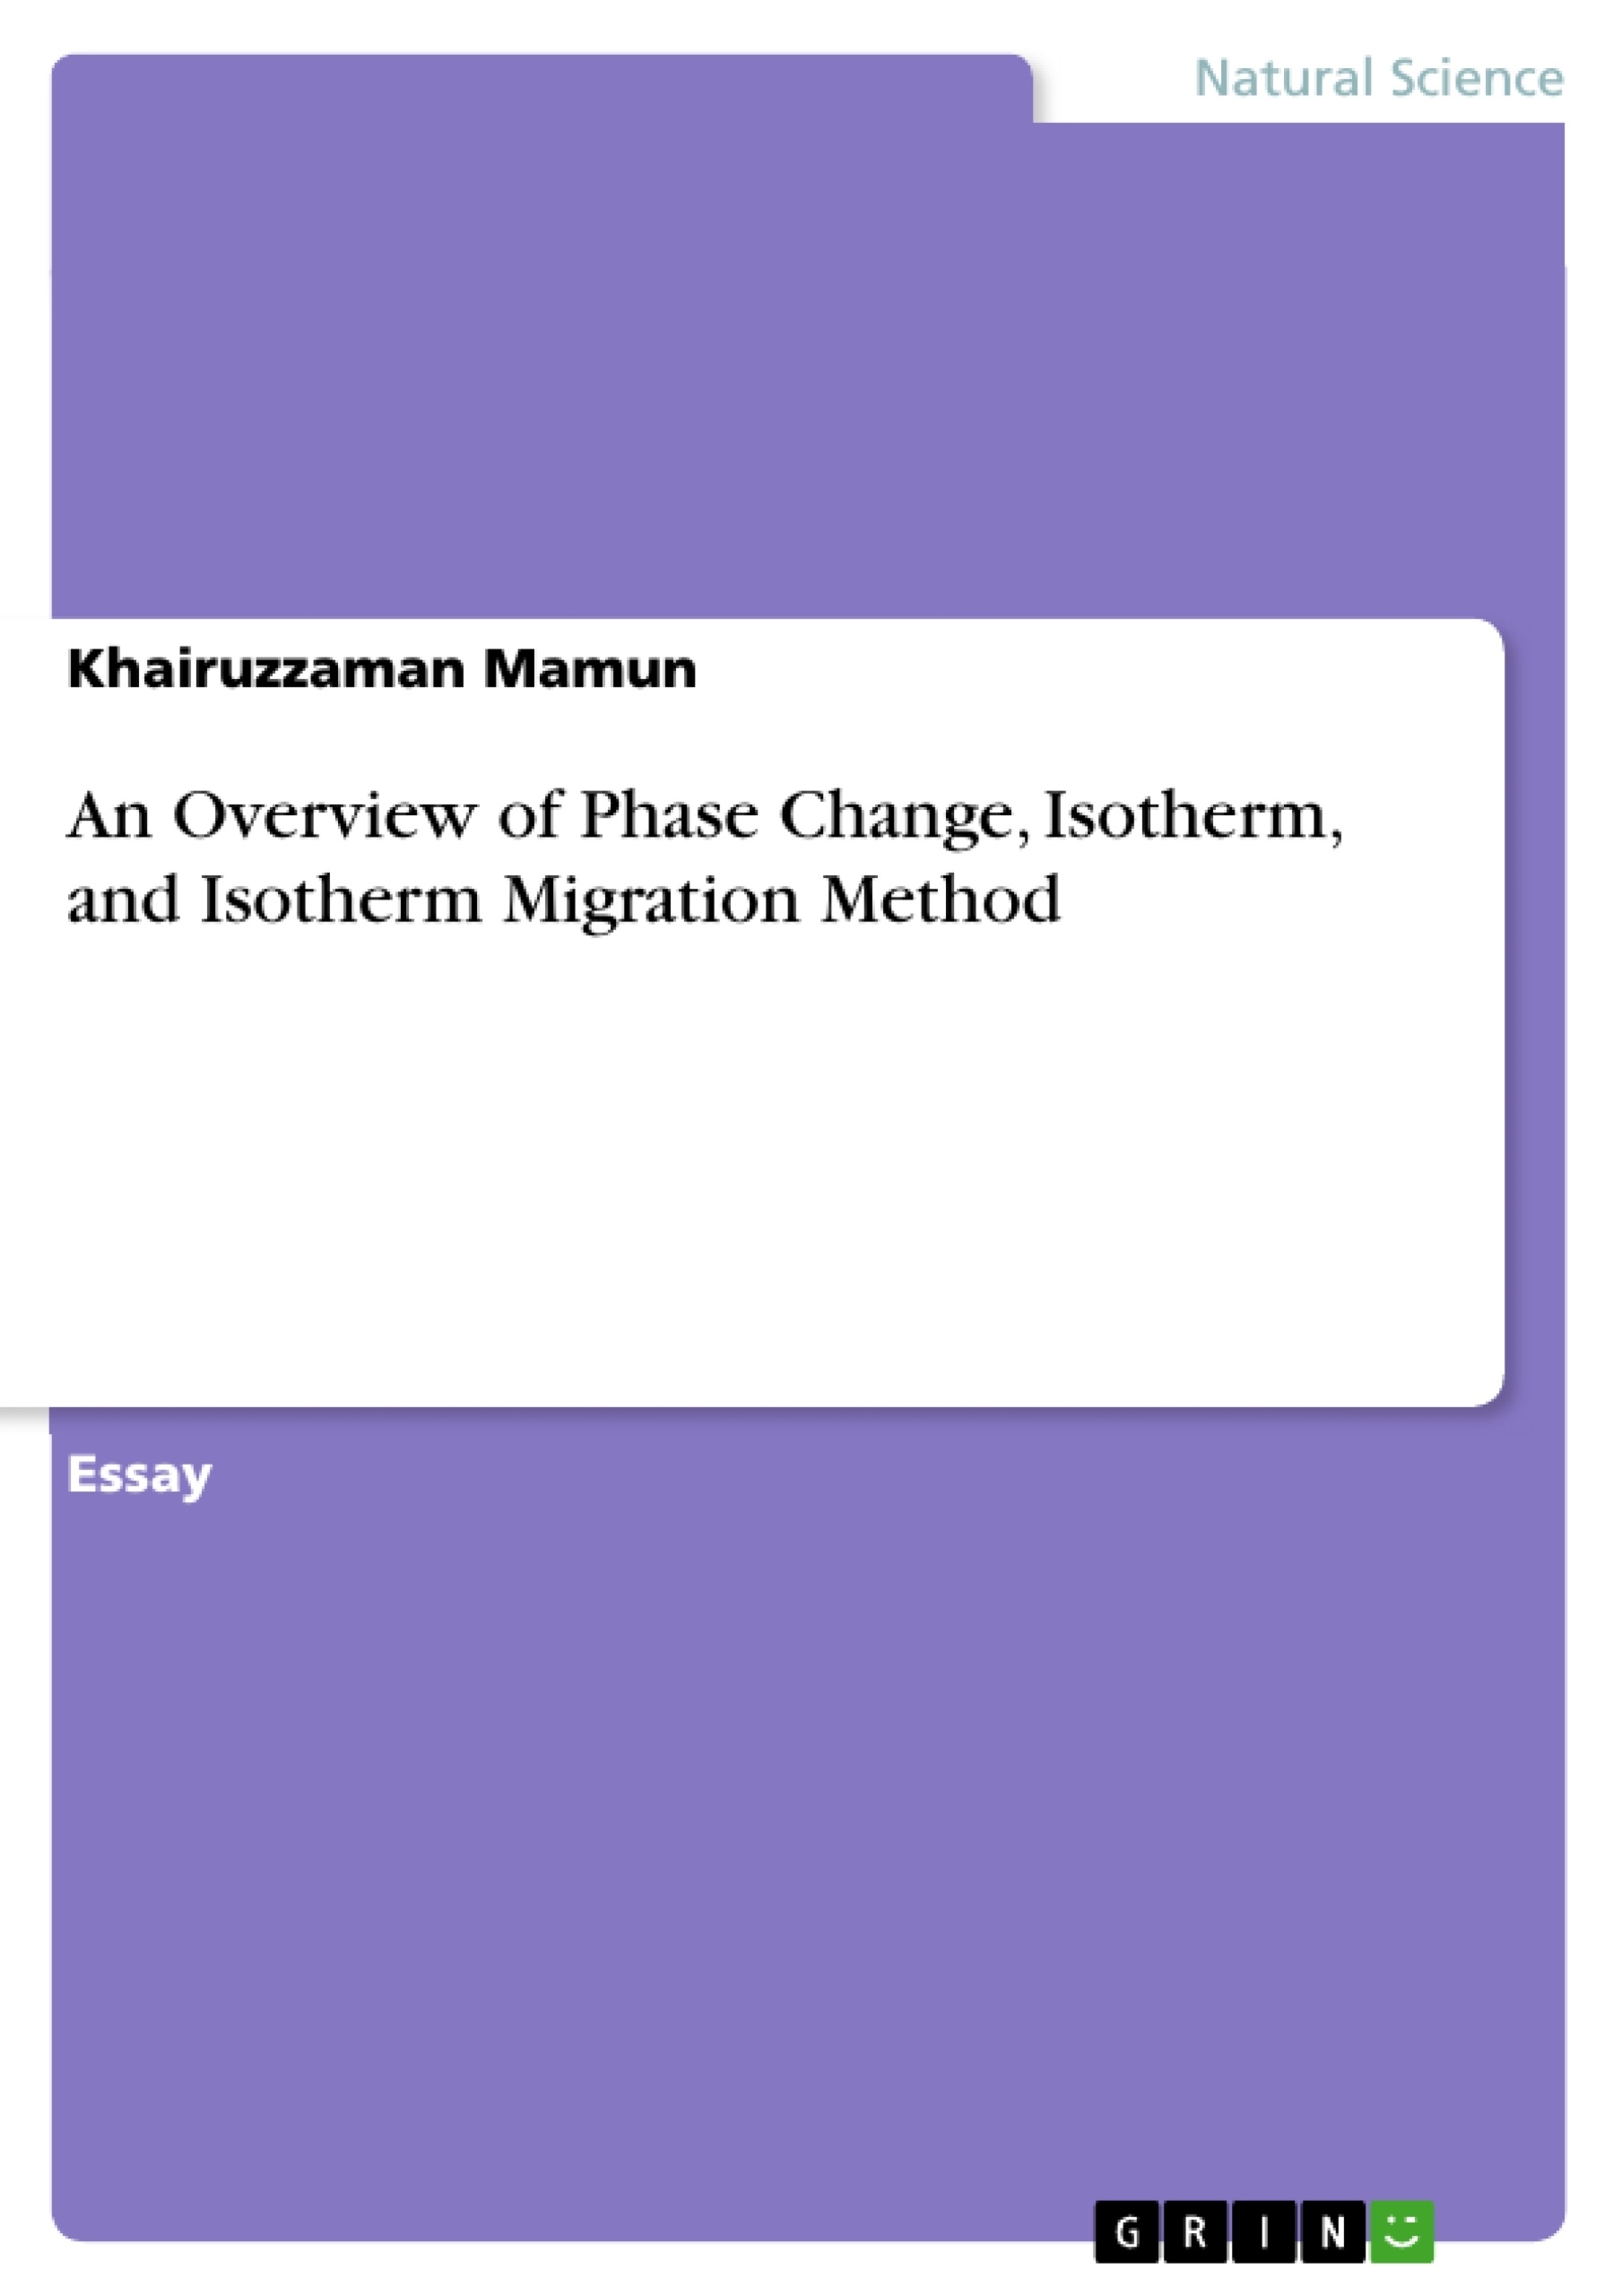 Title: An Overview of Phase Change, Isotherm, and Isotherm Migration Method